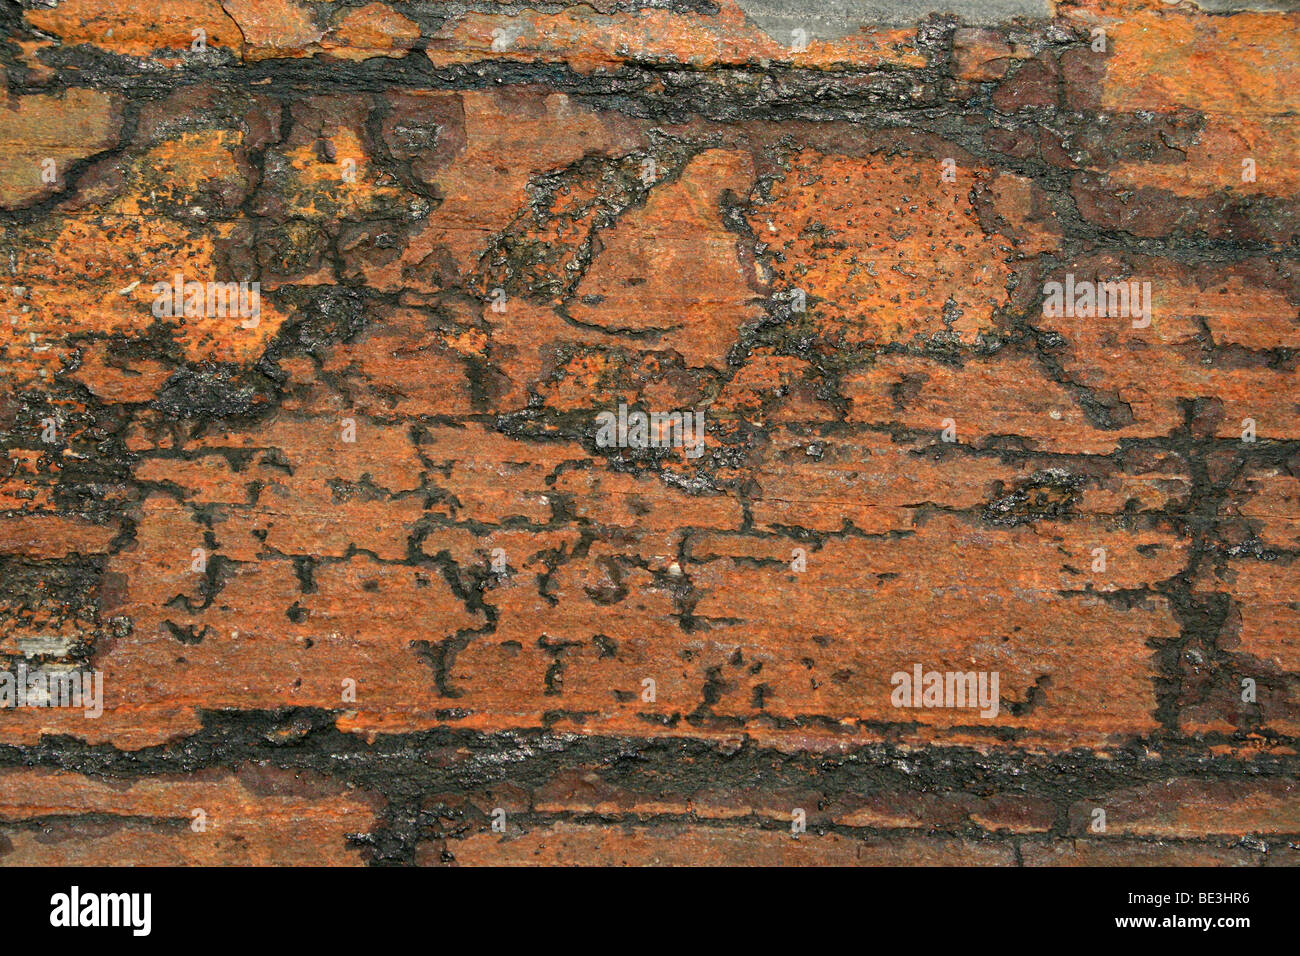 Rust Coloured Patterns On The Metamorphic Rock Slate. Taken In Soweto, Johannesburg, South Africa Stock Photo